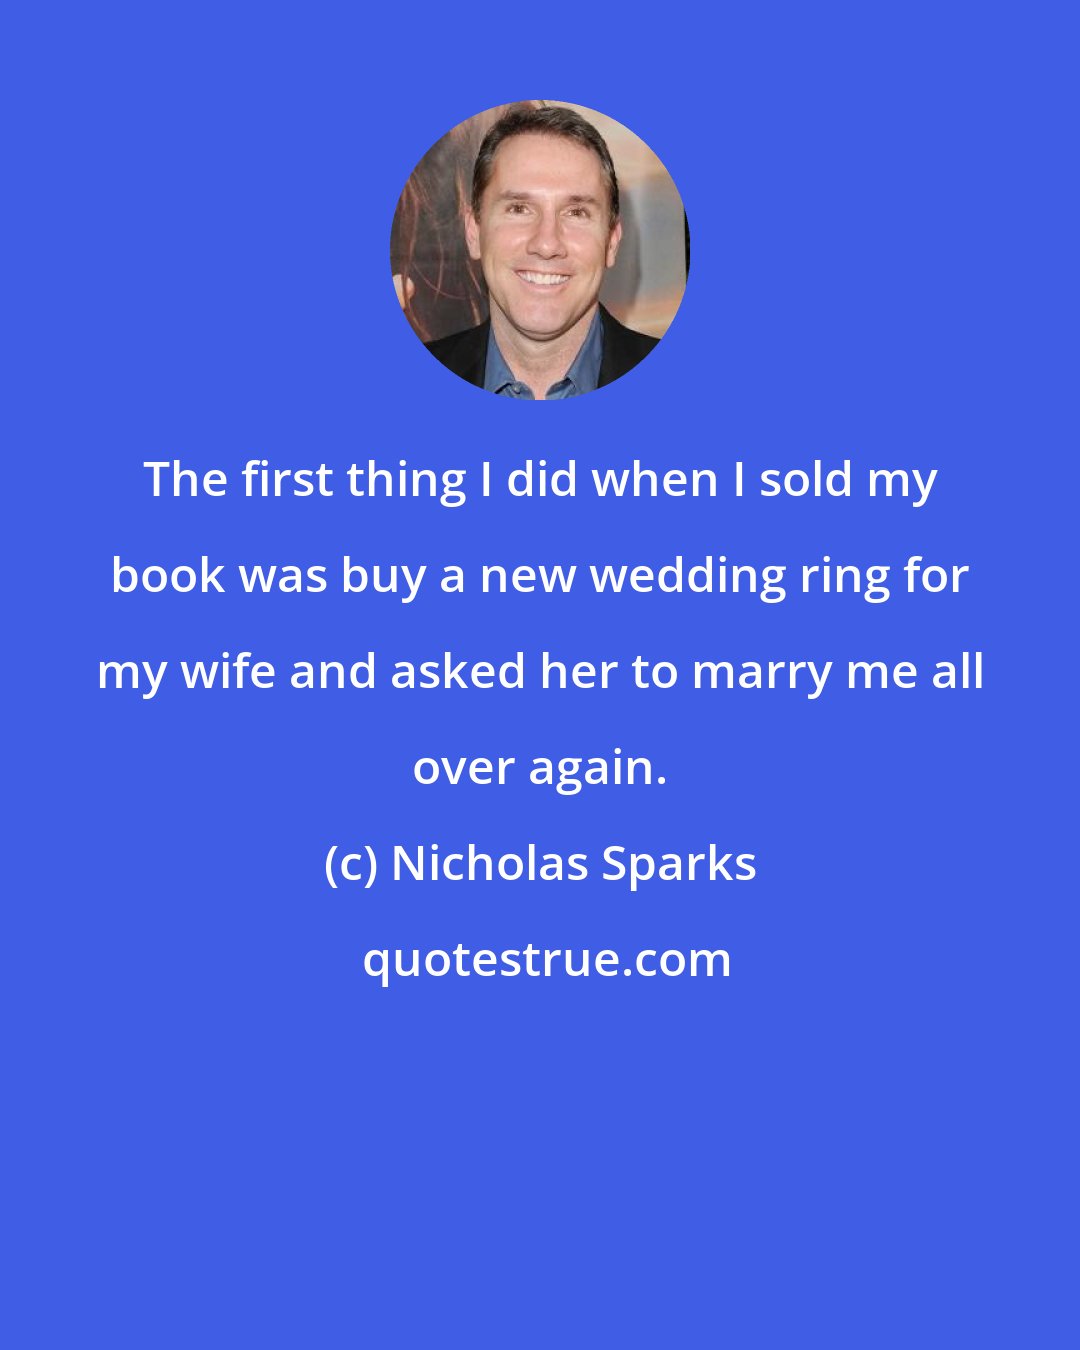 Nicholas Sparks: The first thing I did when I sold my book was buy a new wedding ring for my wife and asked her to marry me all over again.